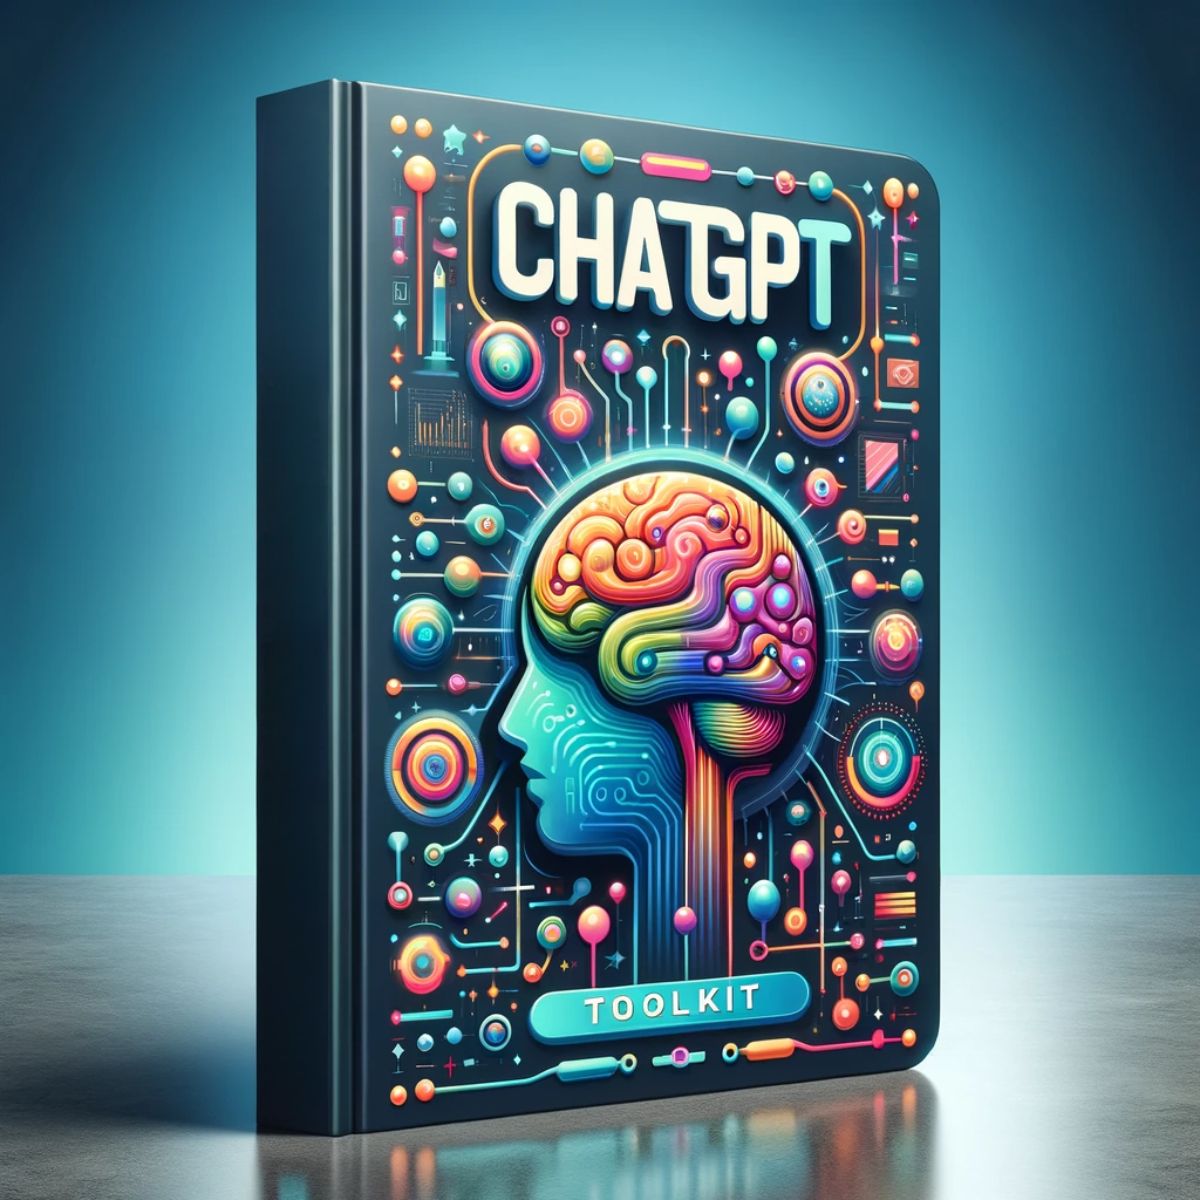 Ultimate ChatGPT Toolkit 1600+ Resources to Master ChatGPT. My GPT Toolkit has: • 550 AI Tools • 1000 Prompts • 15 Prompt Writing Tips • 17 ChatGPT/AI Cheat Sheets • 50 Marketing Mega Prompts 📌 To get this free guide: 1. Comment 'send' 2. Repost 3. Follow me for DM